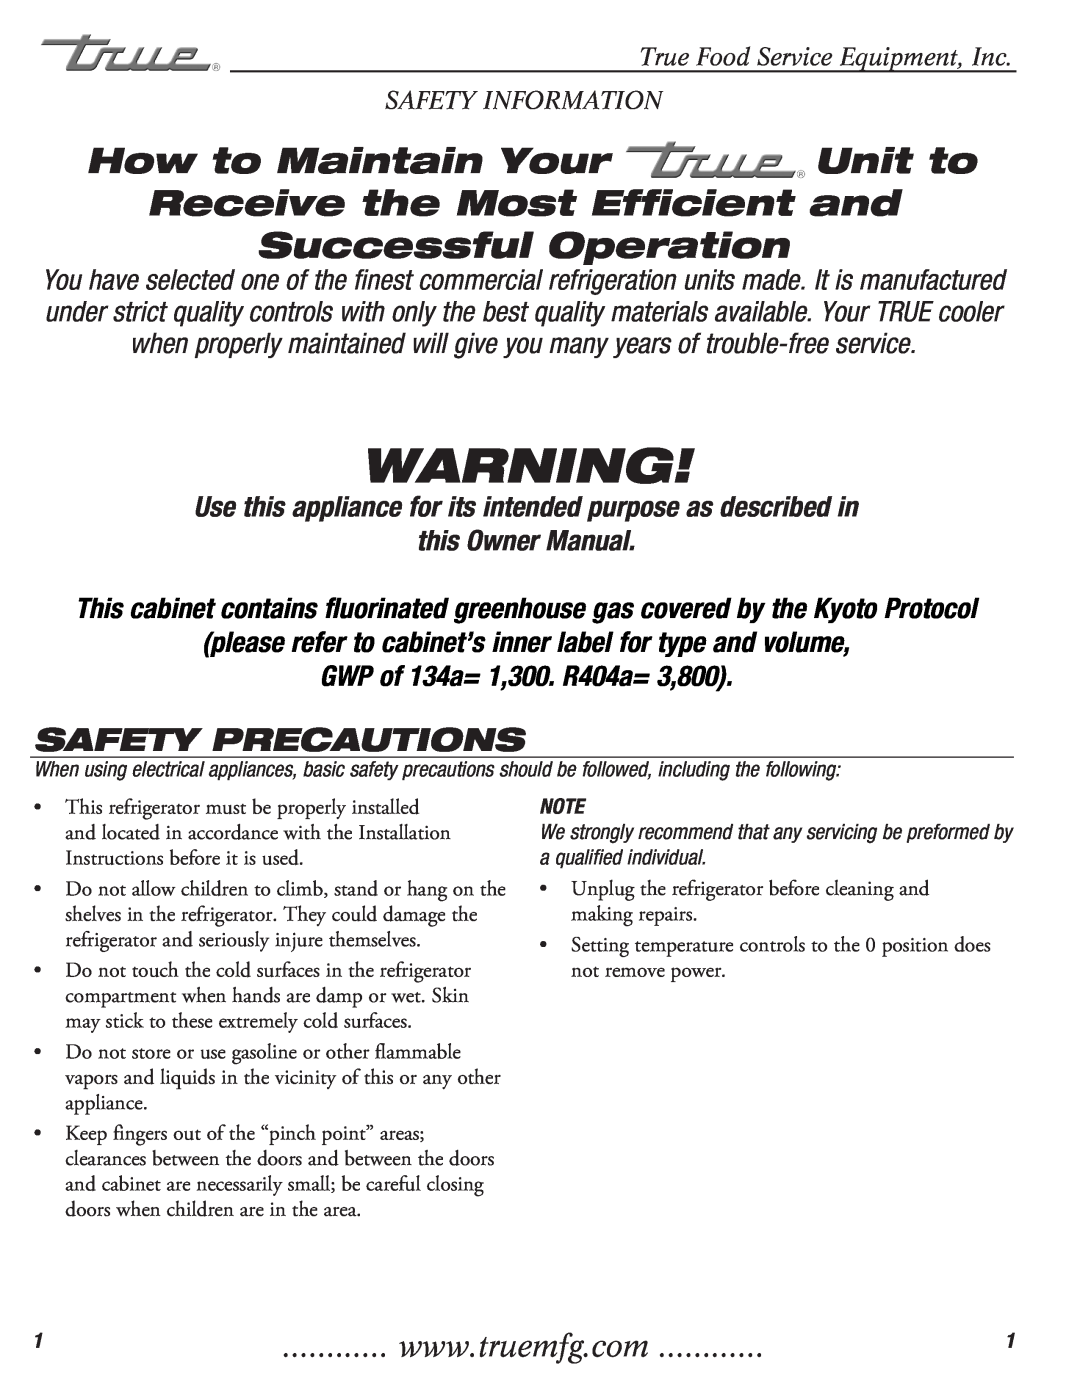 True Manufacturing Company TFP-32-12M-D-2 Safety Precautions, Use this appliance for its intended purpose as described in 